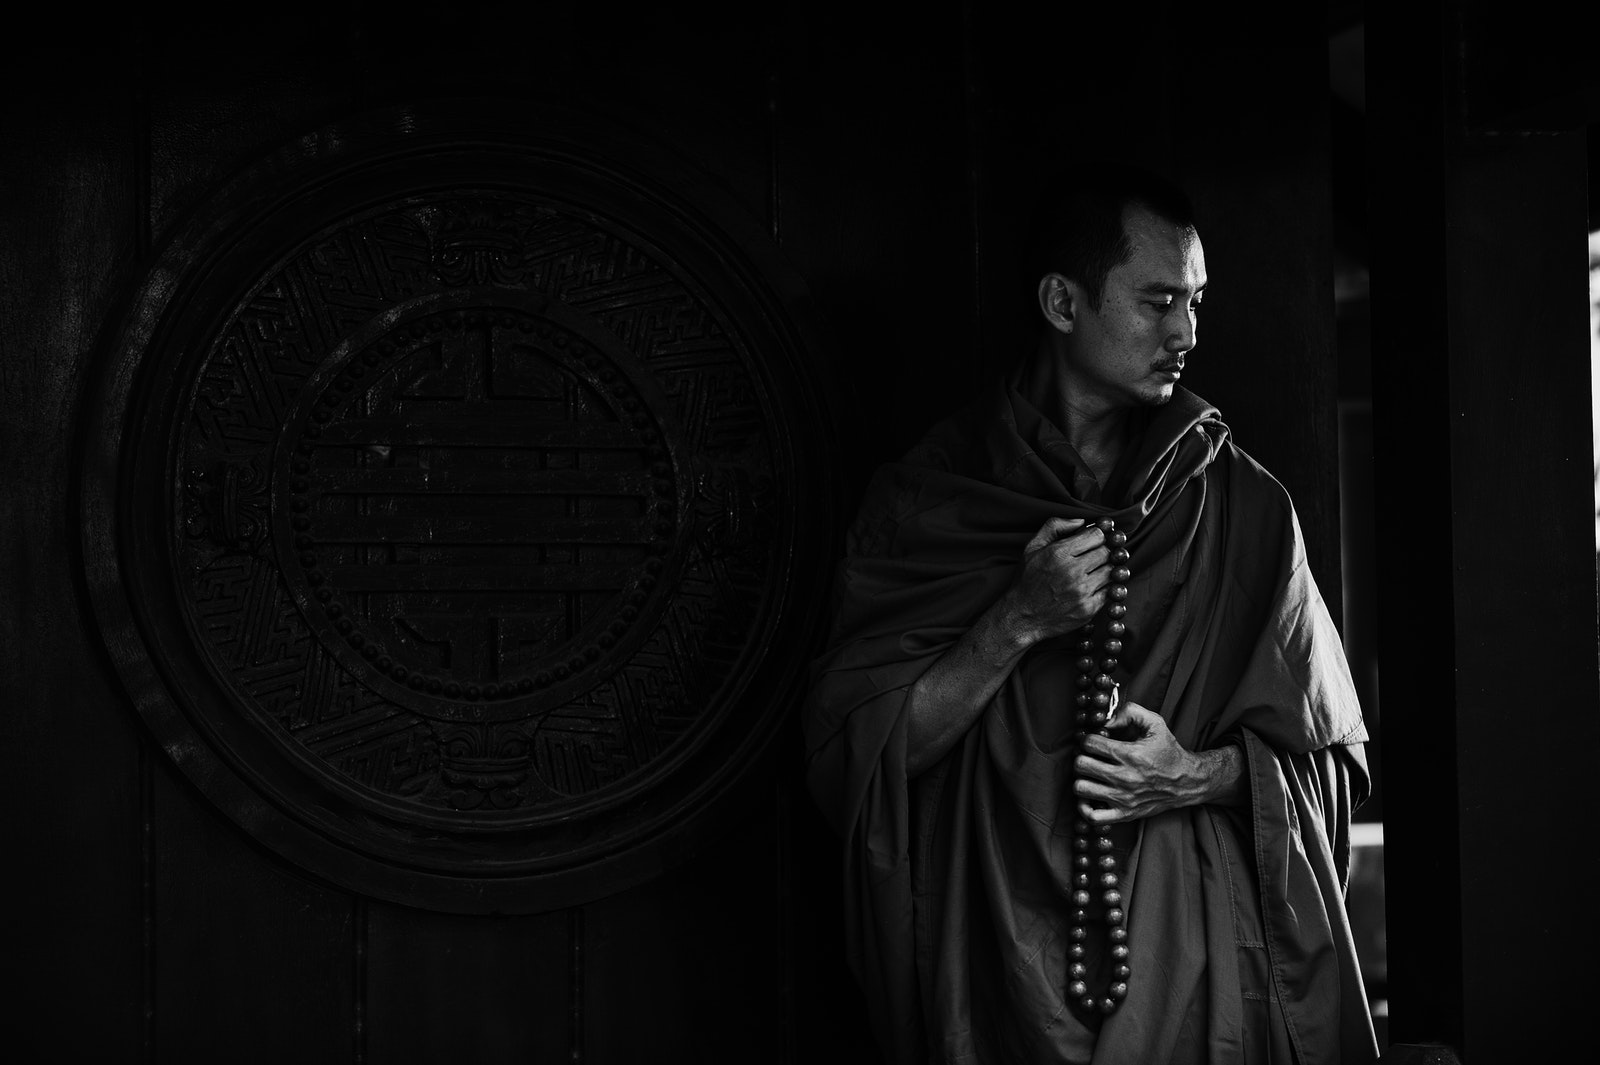 Black and white calm pensive Buddhist monk with beads wearing traditional clothes standing near ornamental temple wall with round caved drawing and looking down in thoughts